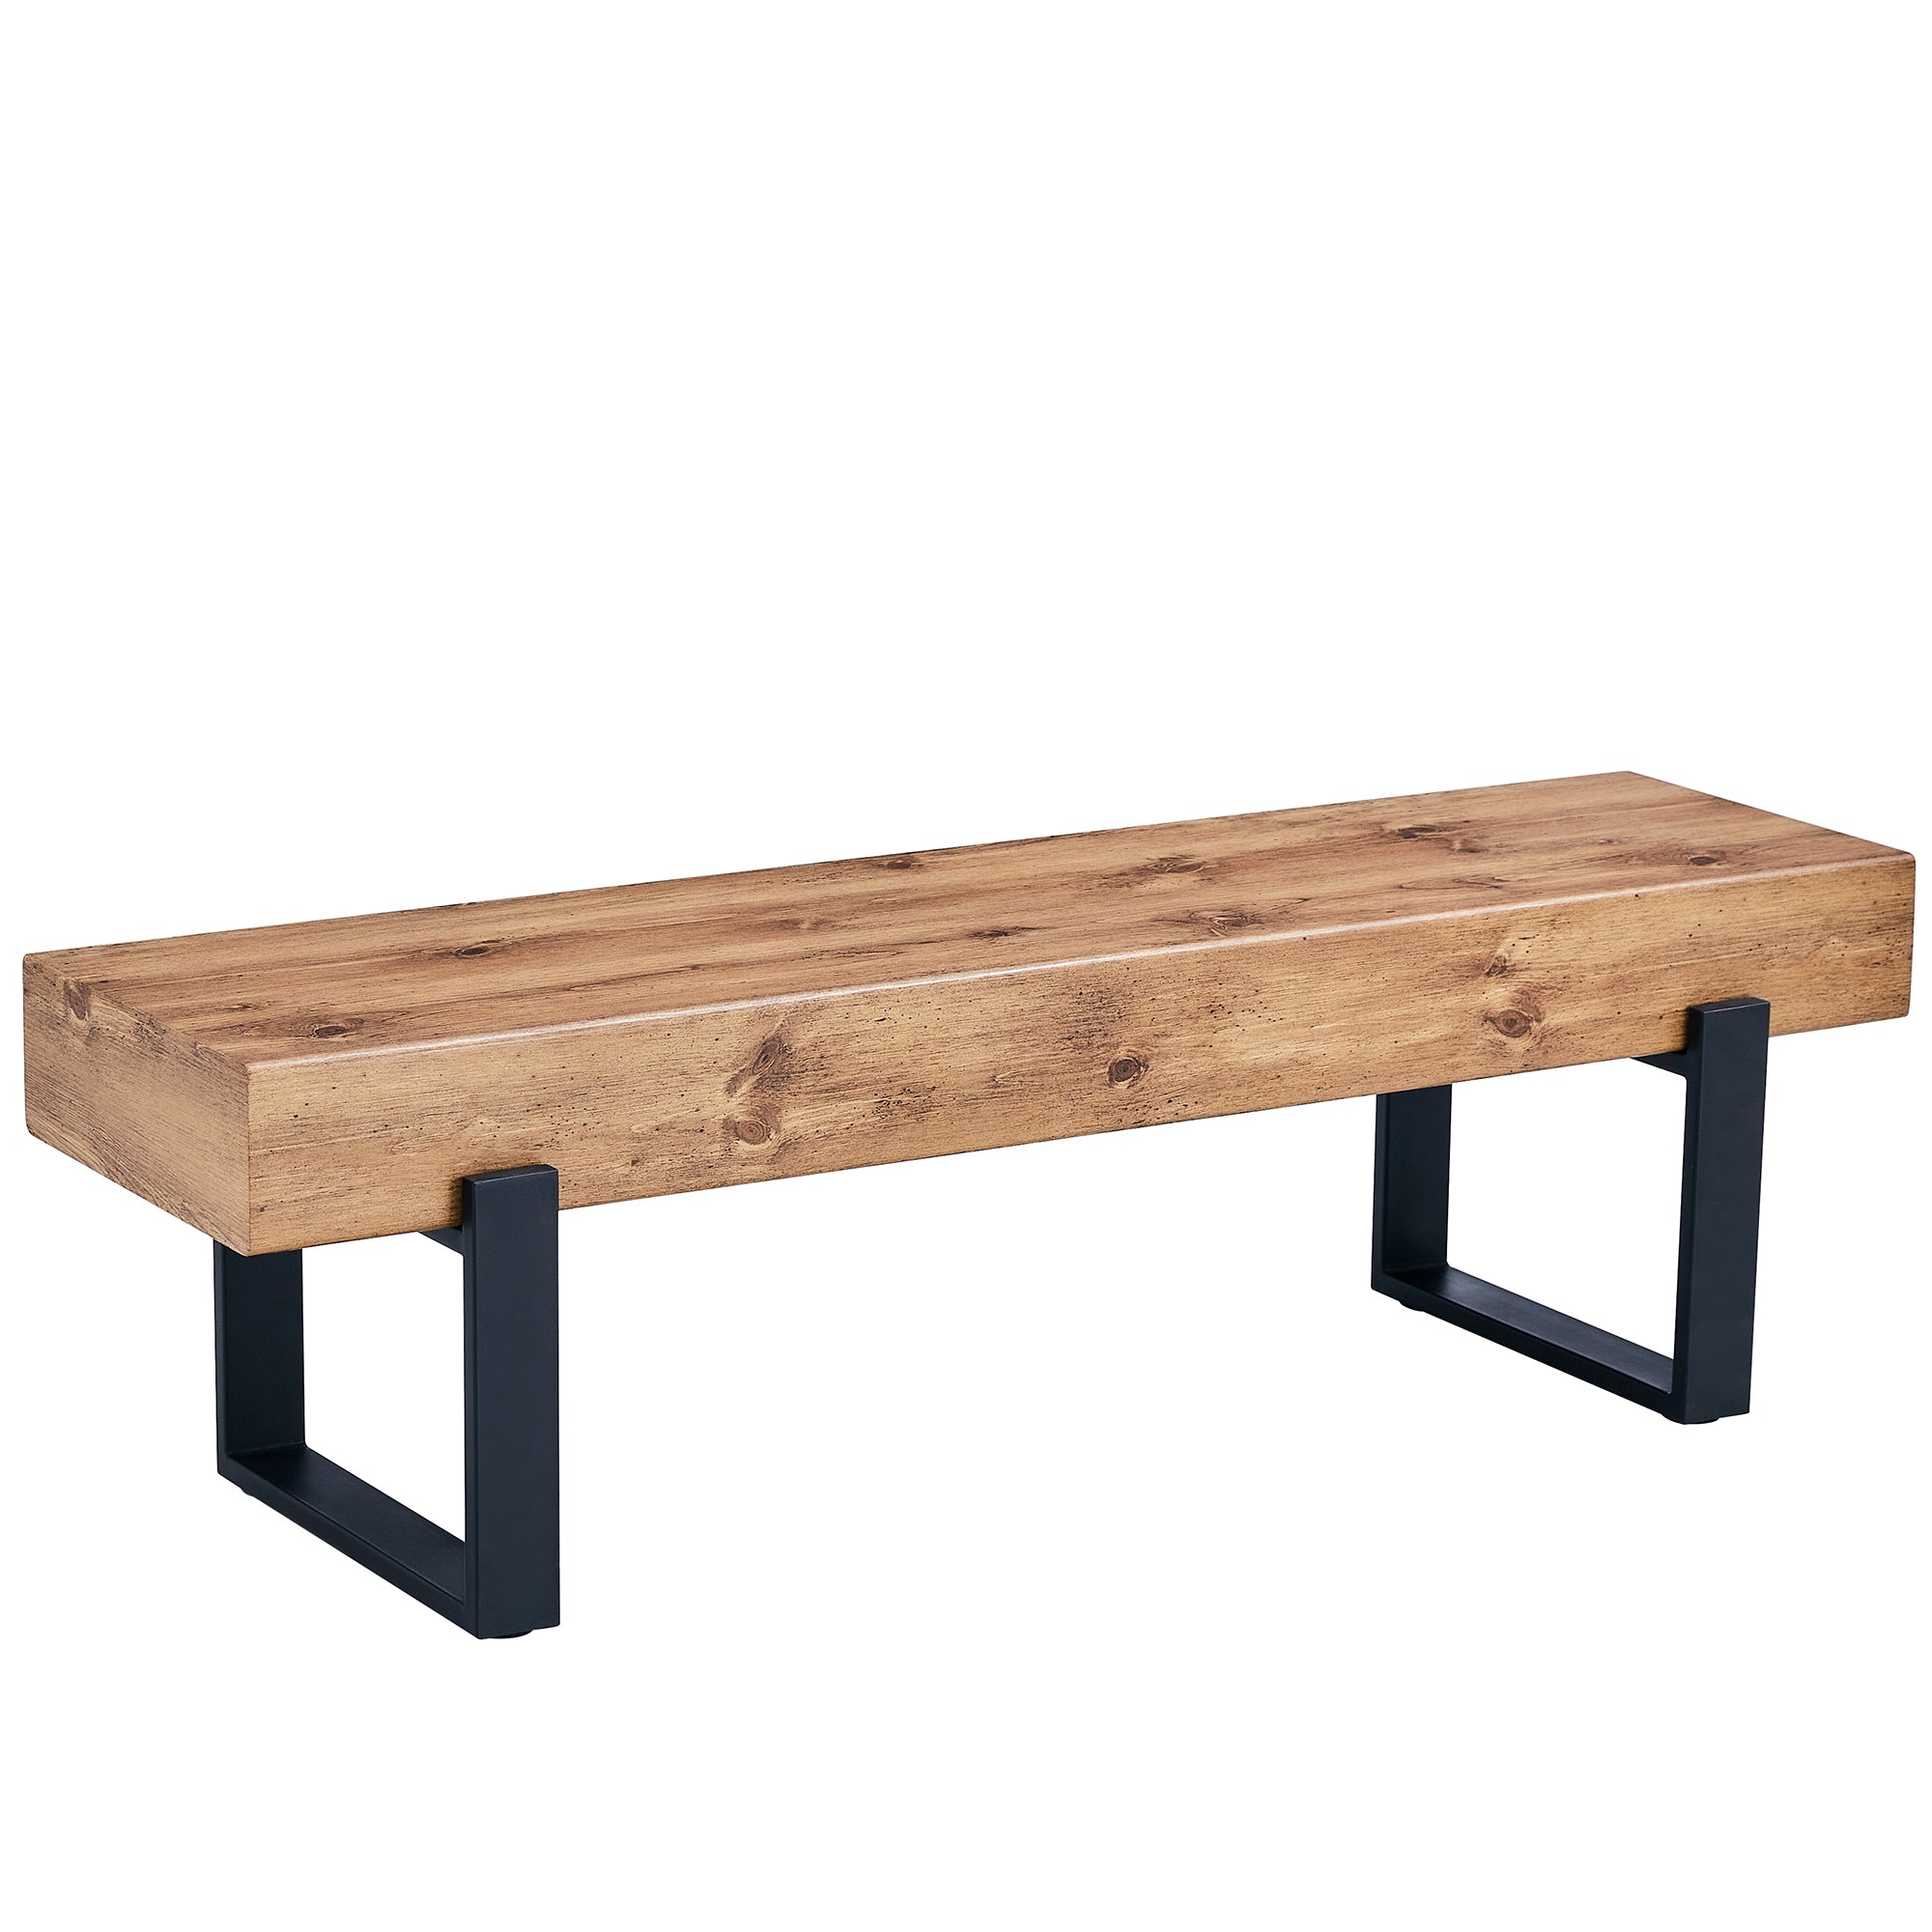 59" Dining Bench, Farmhouse Indoor Kitchen Table Benches, Bed Bench, Industrial Shoe Bench, Entryway Benches